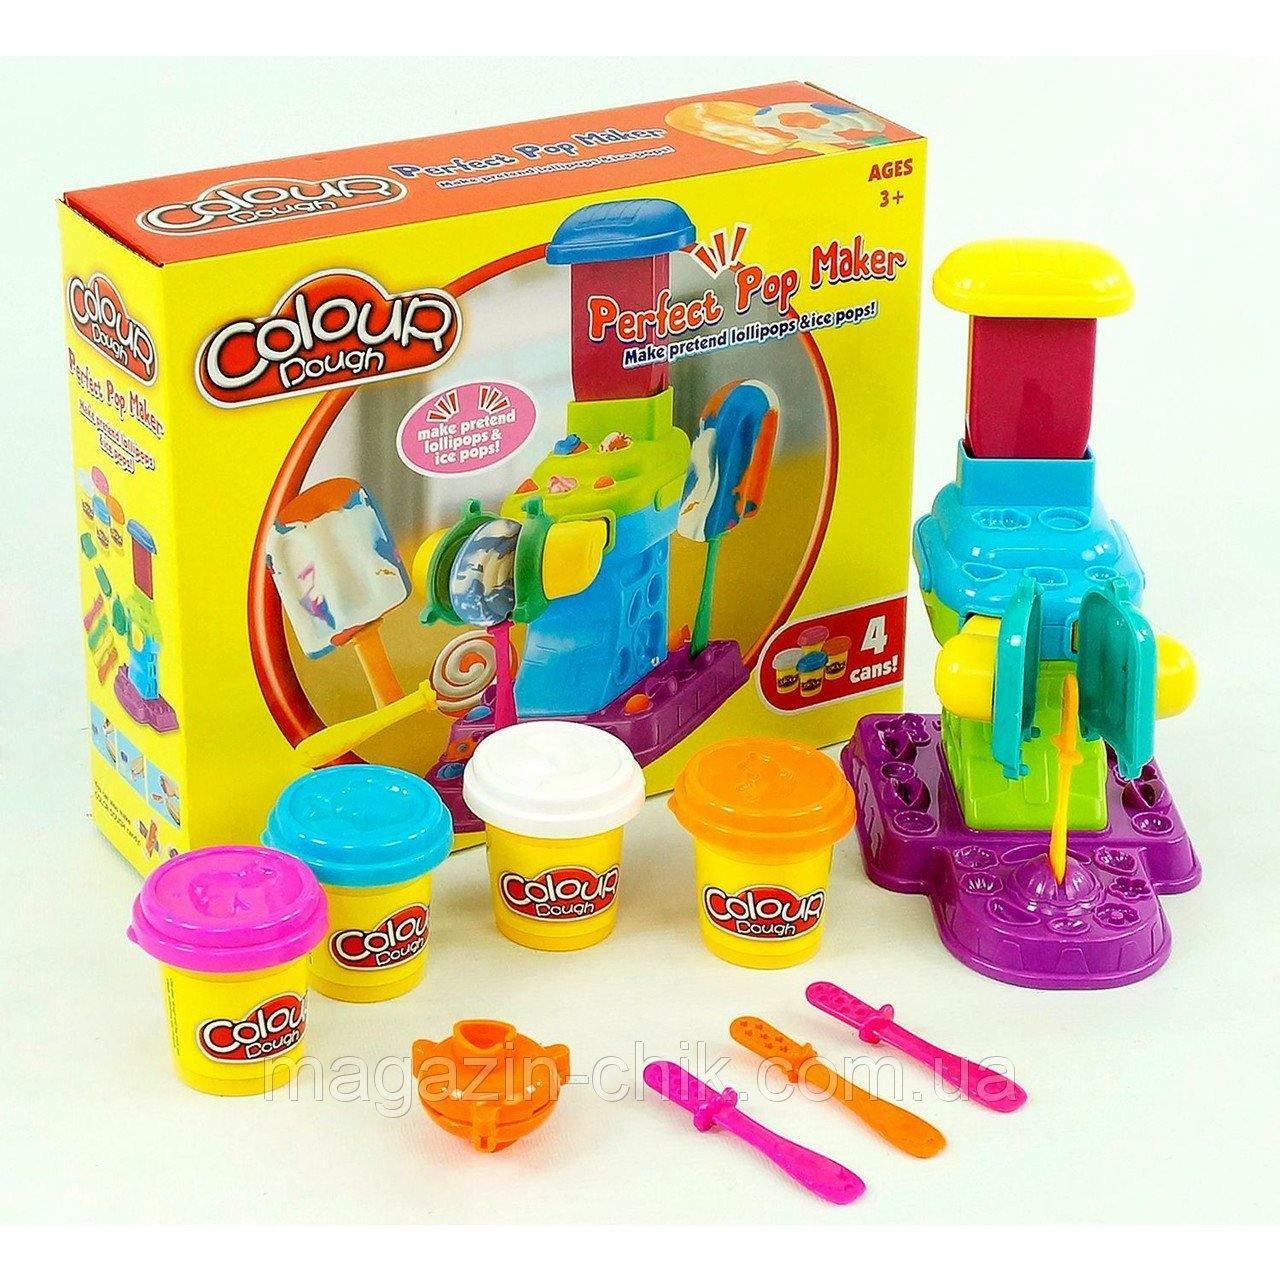 Color Dough - Perfect Pop Maker 4 Cans Multi Color - BumbleToys - 2-4 Years, 5-7 Years, Boys, Clearance, Dough, Girls, Ice cream, Make & Create